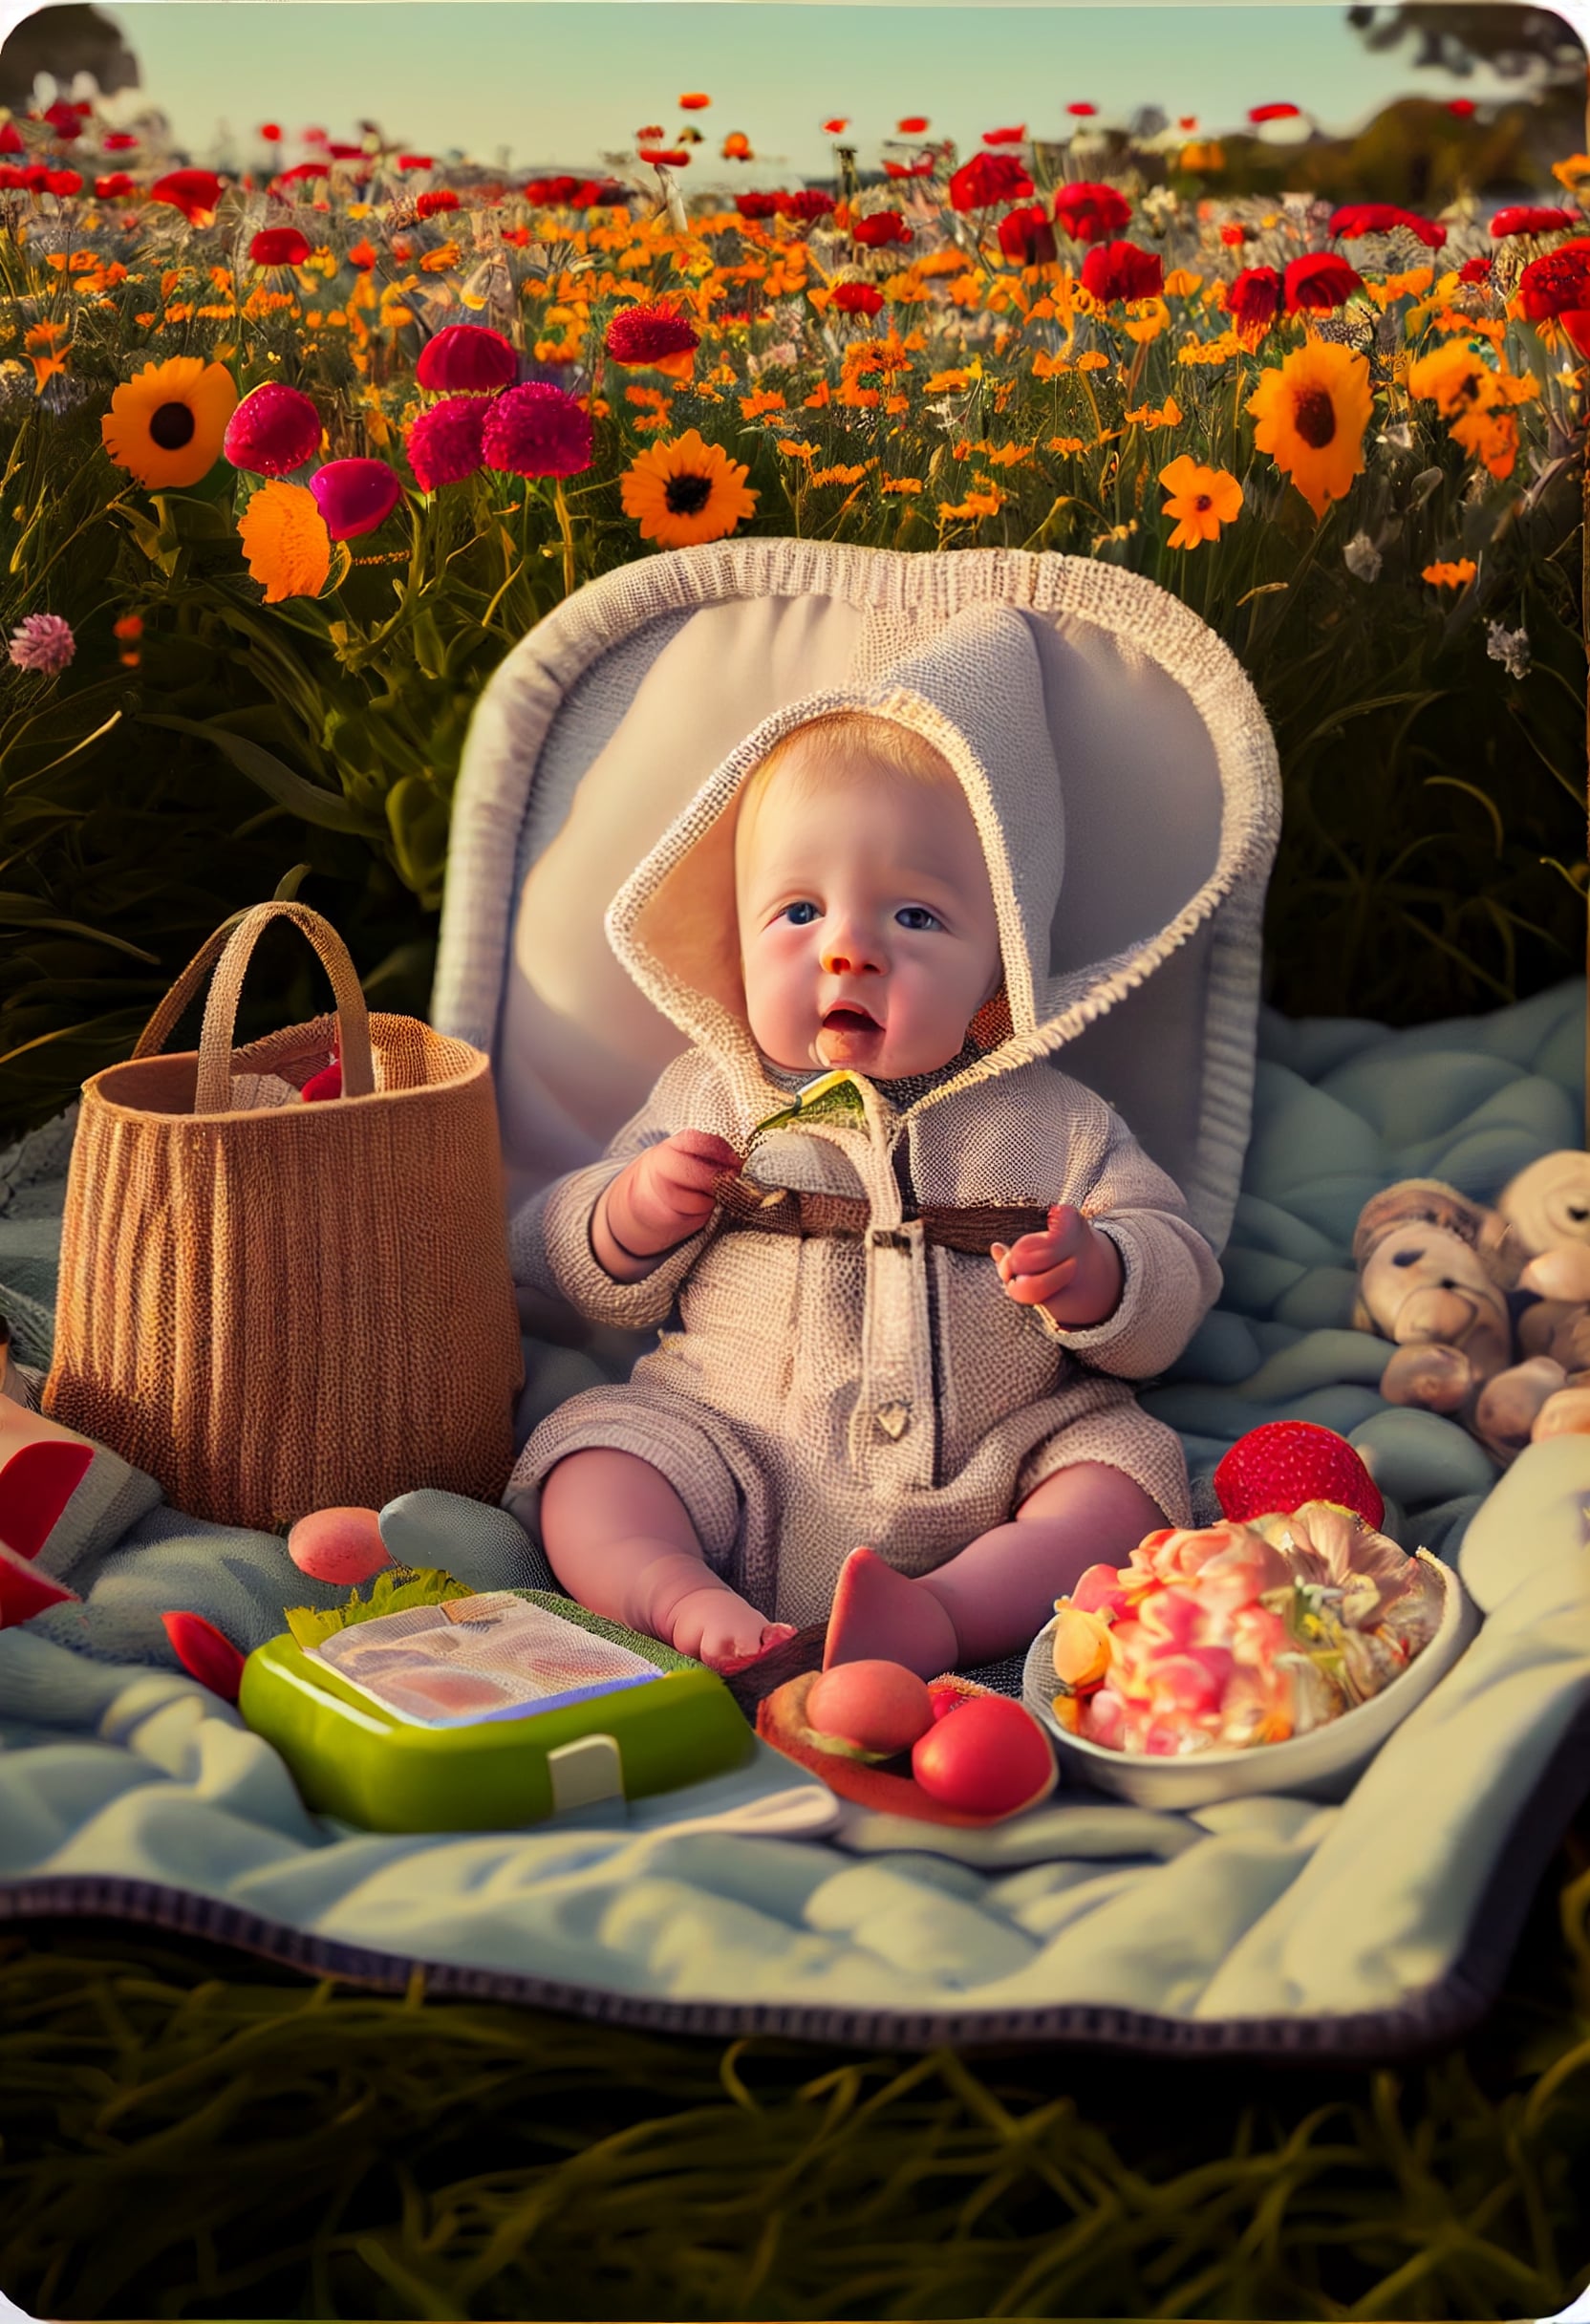 digitaldoodles realistic photography of an infant baby in a pic 6bac3f4c 638f 4375 a3ec 17f93cdec87d 277